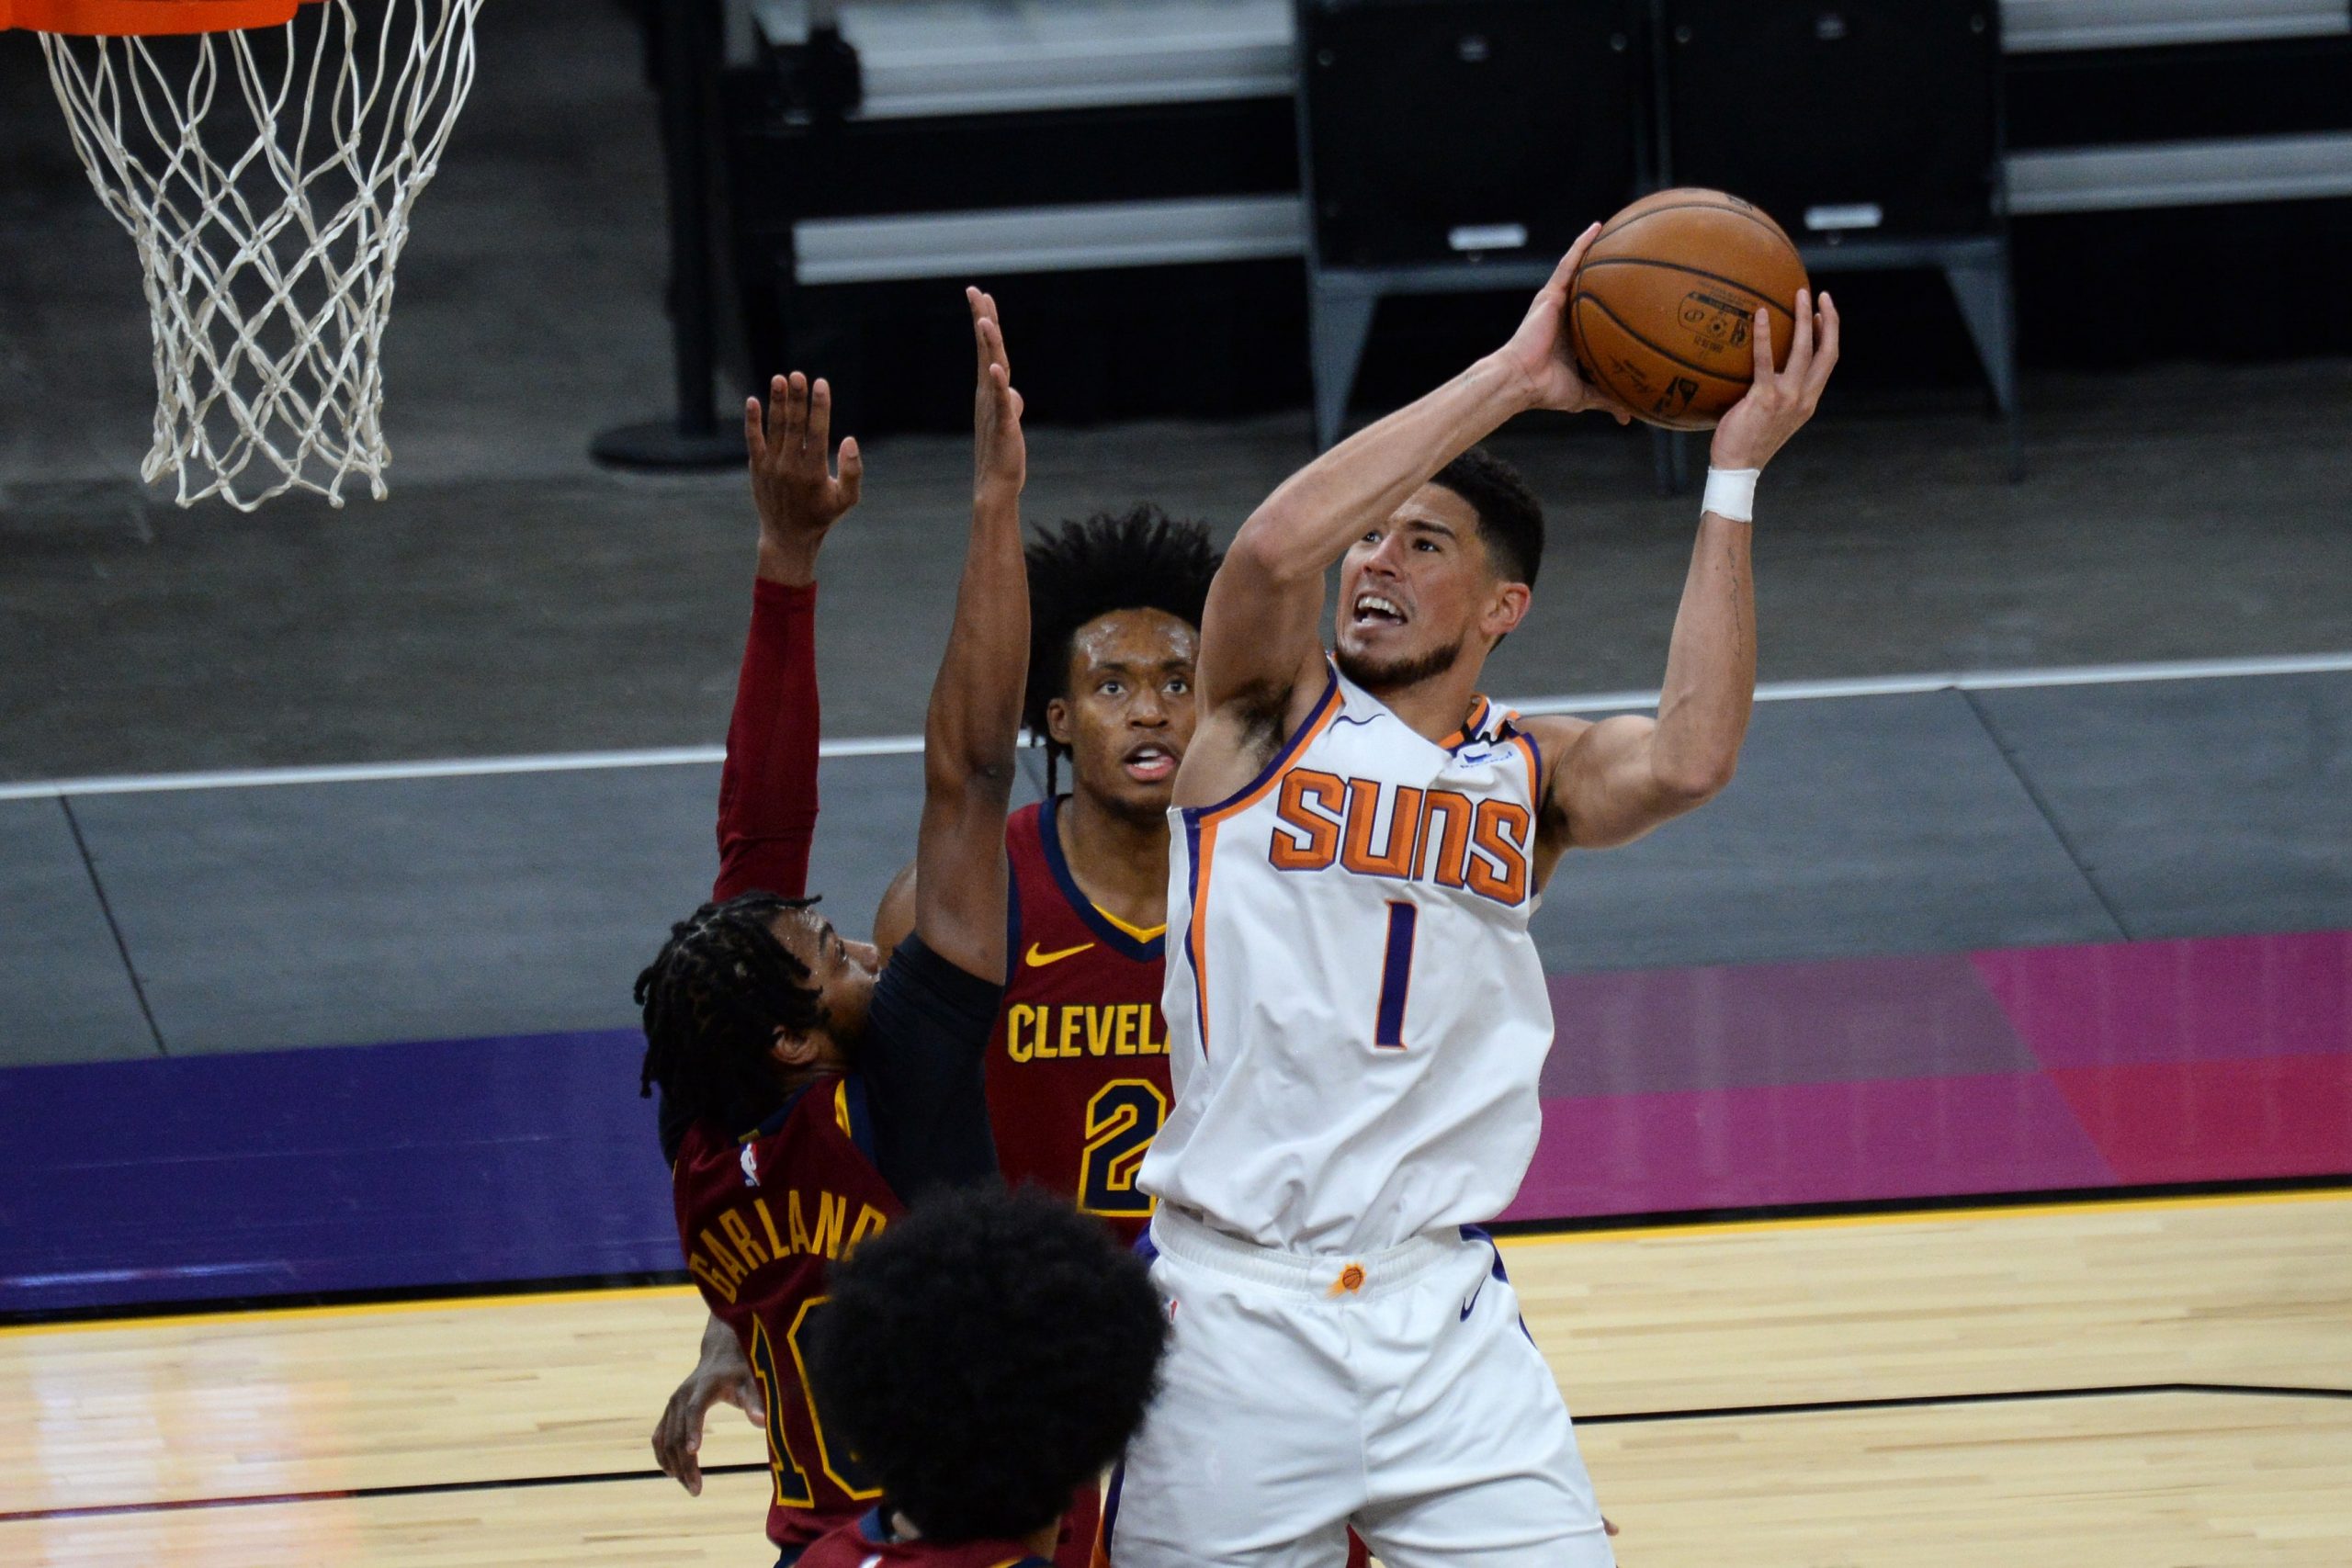 Phoenix Suns guard Devin Booker (1) shoots over Cleveland Cavaliers guard Darius Garland (10) during the second half at Phoenix Suns Arena.